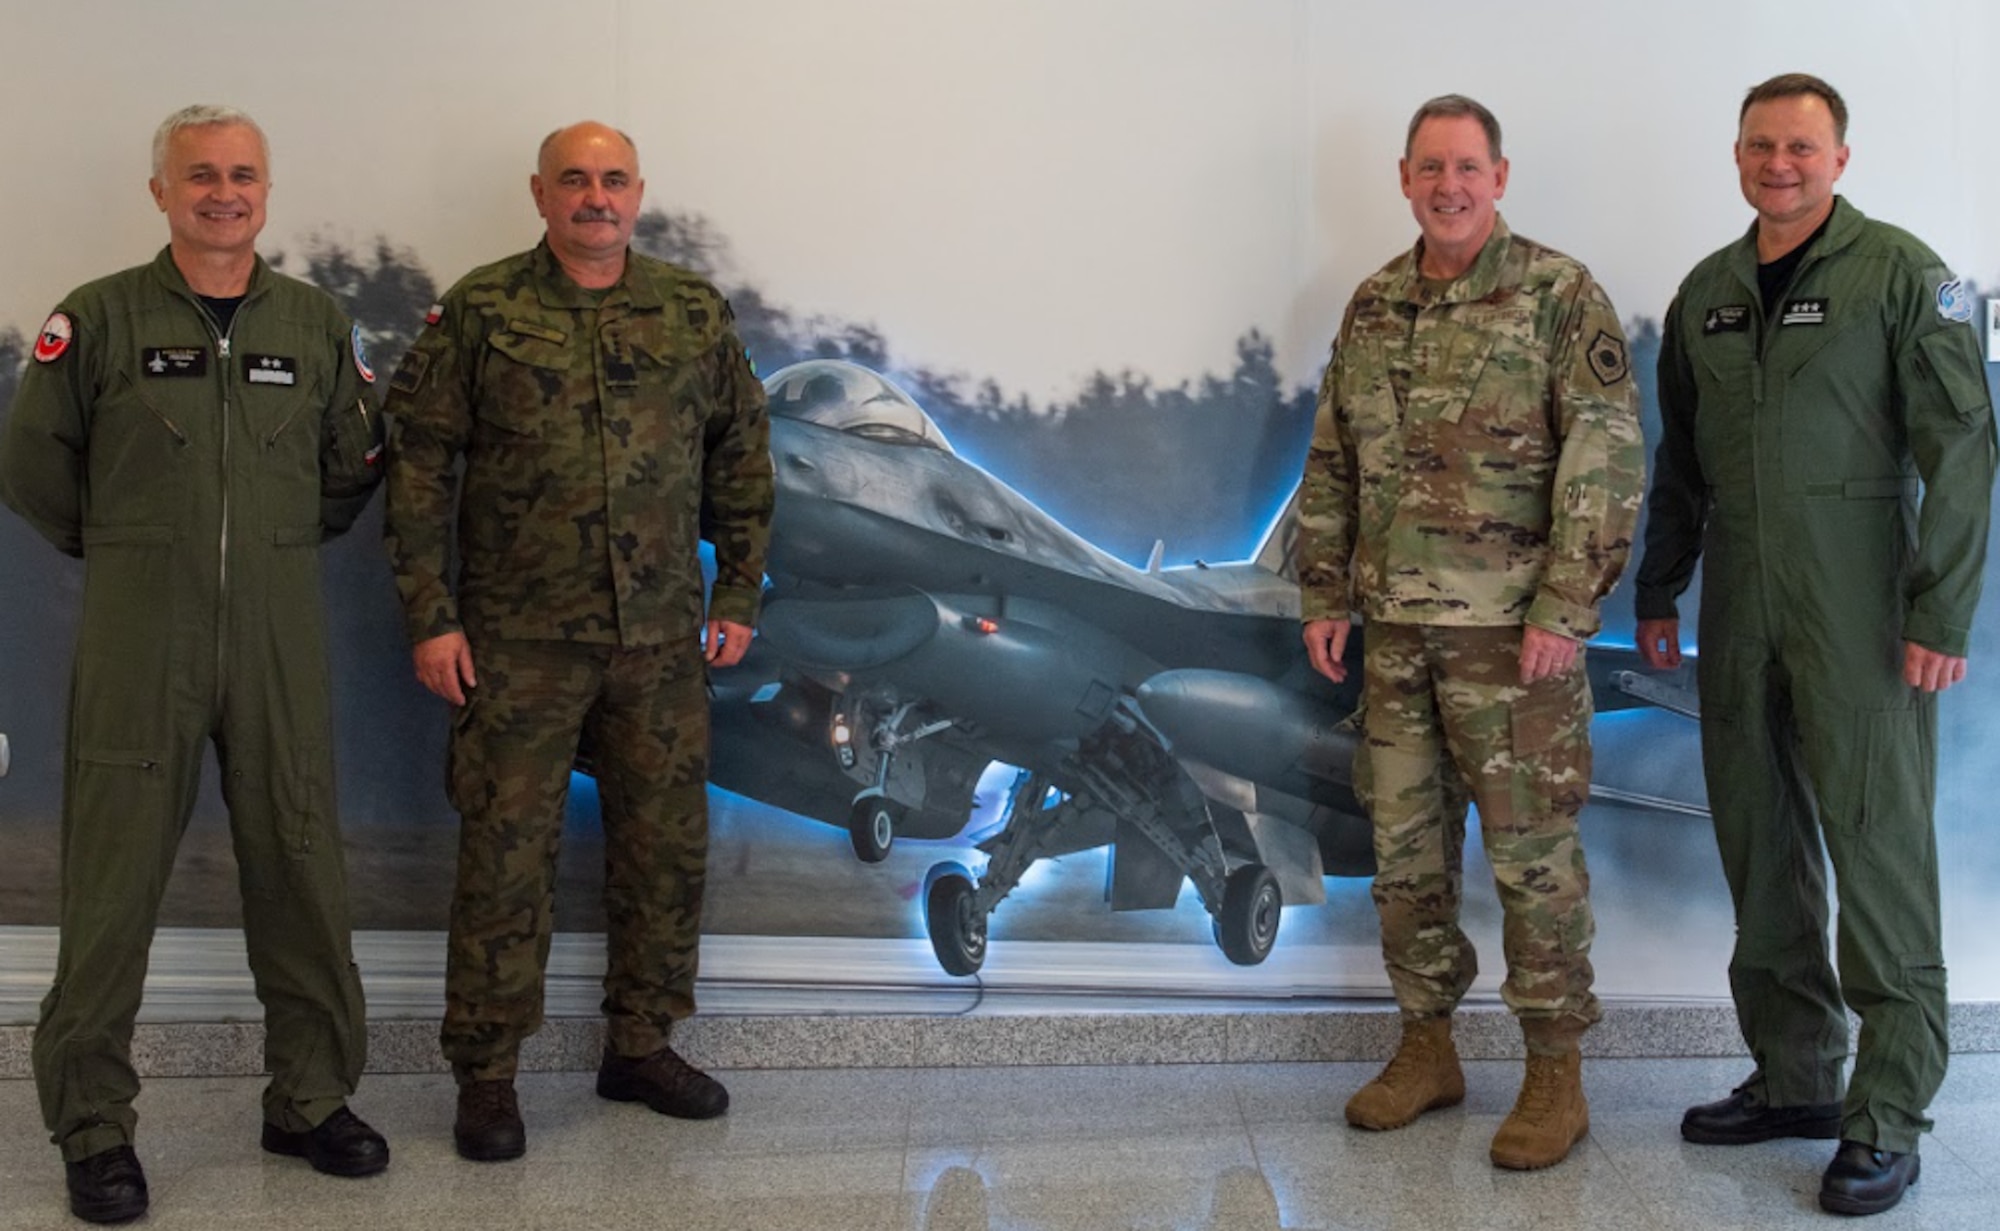 U.S. Air Force Gen. James Hecker, U.S. Air Forces in Europe and Air Forces Africa commander, visited the 32nd Tactical Air Base in Łask, Poland, to welcome 12 U.S. Air Force F-22 Raptors forward deploying from the 90th Fighter Squadron at Joint Base Elmendorf-Richardson, Alaska, Aug. 5, 2022. The Raptor is a critical component of the global strike Task Force, and is designed to project air dominance, rapidly and at great distances to defeat threats.  (U.S. Air Force photo by Staff Sergeant Danielle Suhklull)